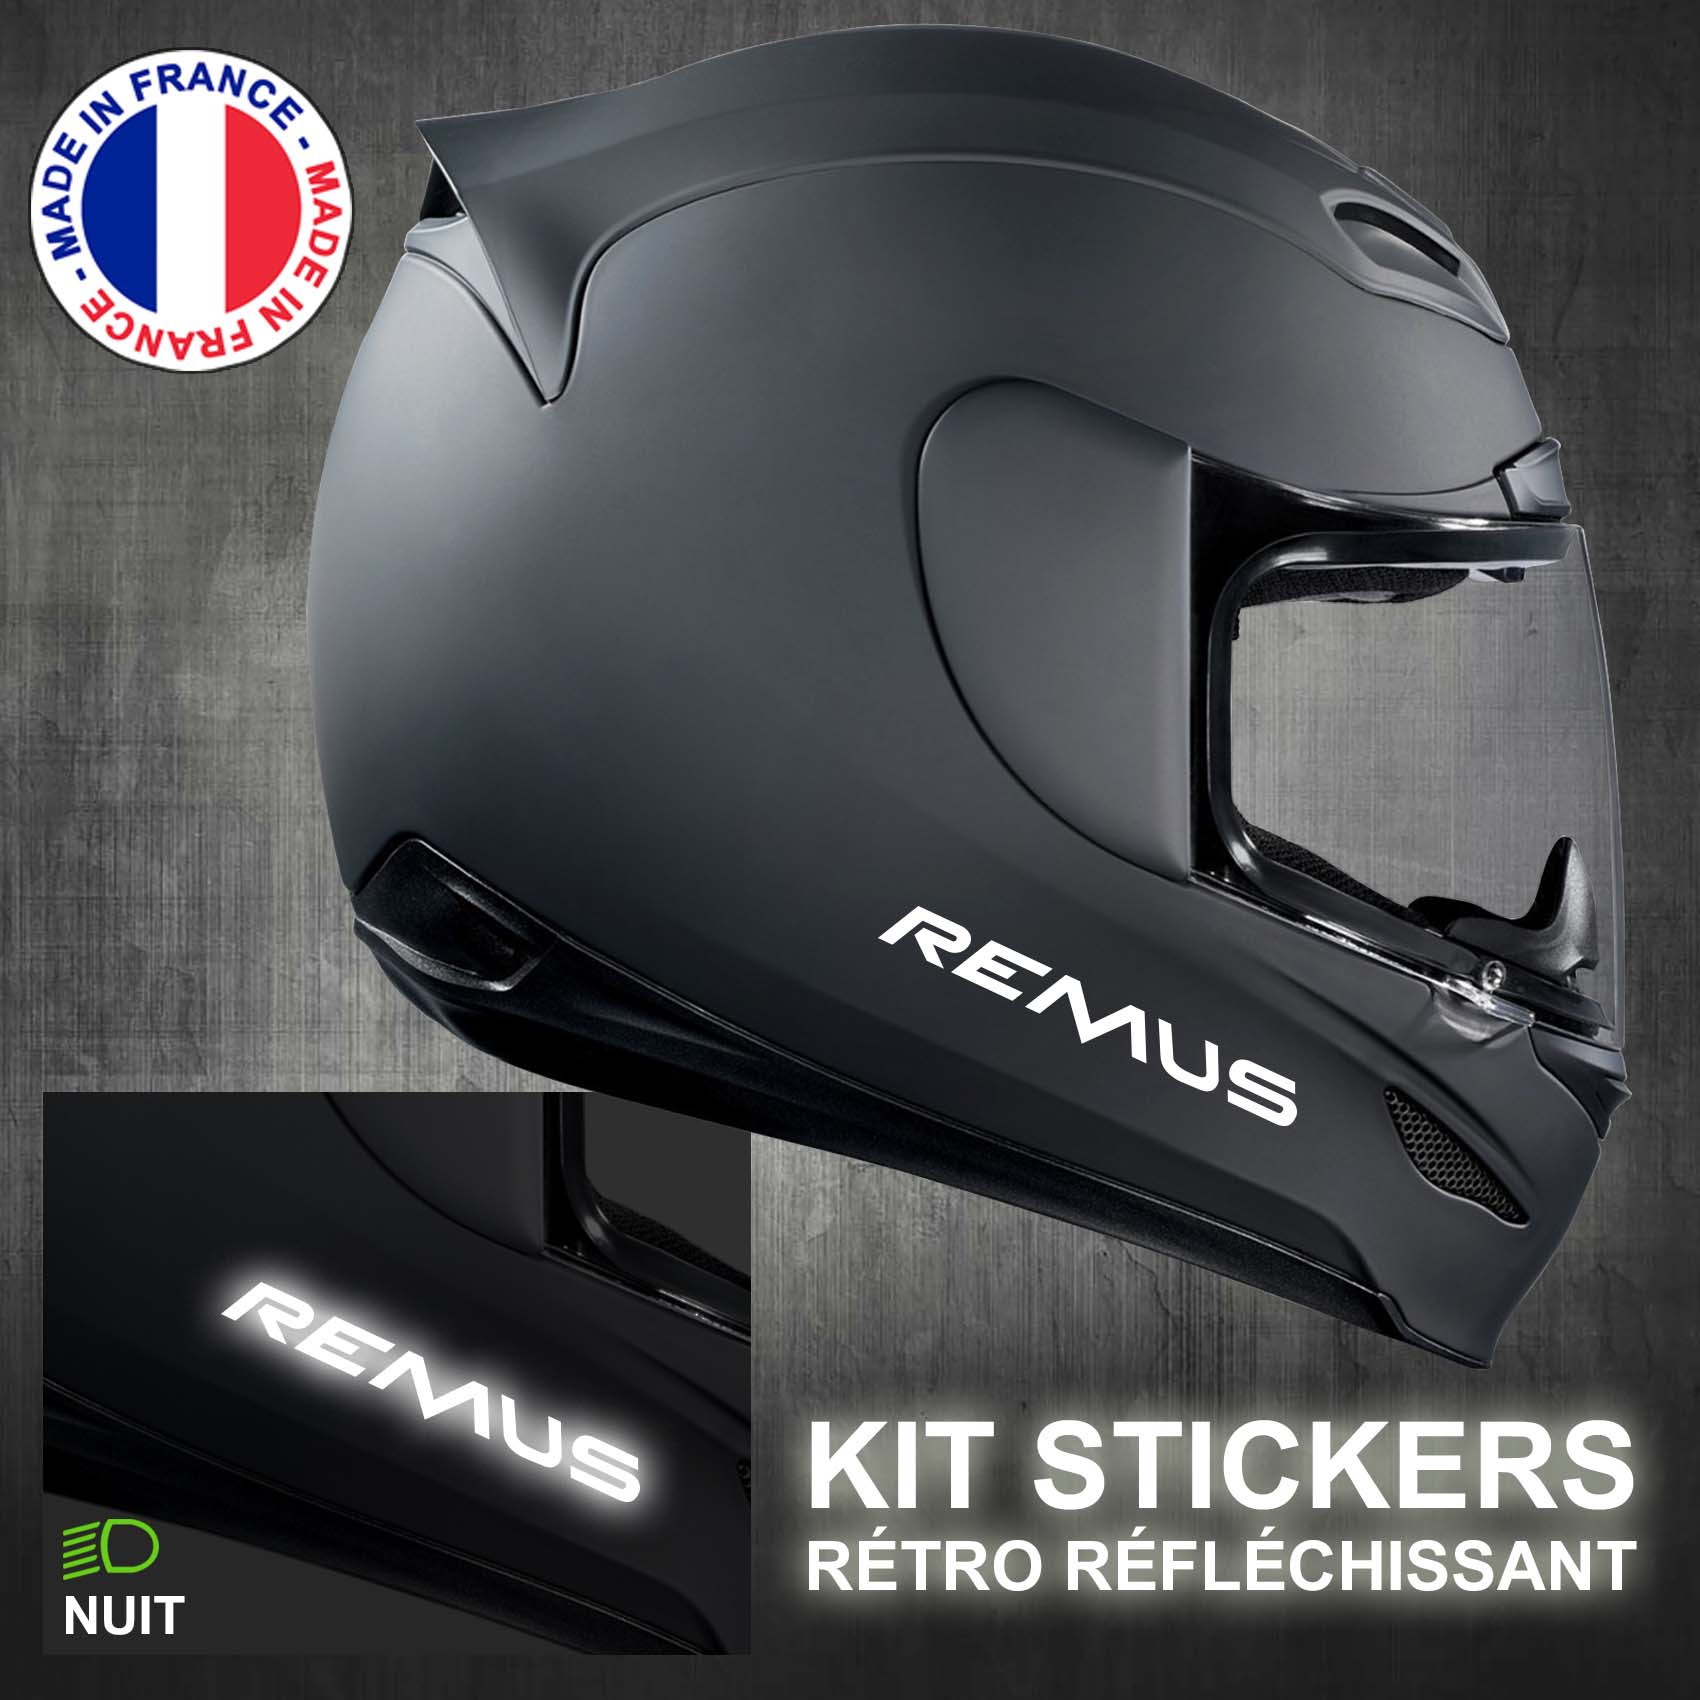 stickers-casque-moto-remus-ref2-retro-reflechissant-autocollant-noir-moto-velo-tuning-racing-route-sticker-casques-adhesif-scooter-nuit-securite-decals-personnalise-personnalisable-min